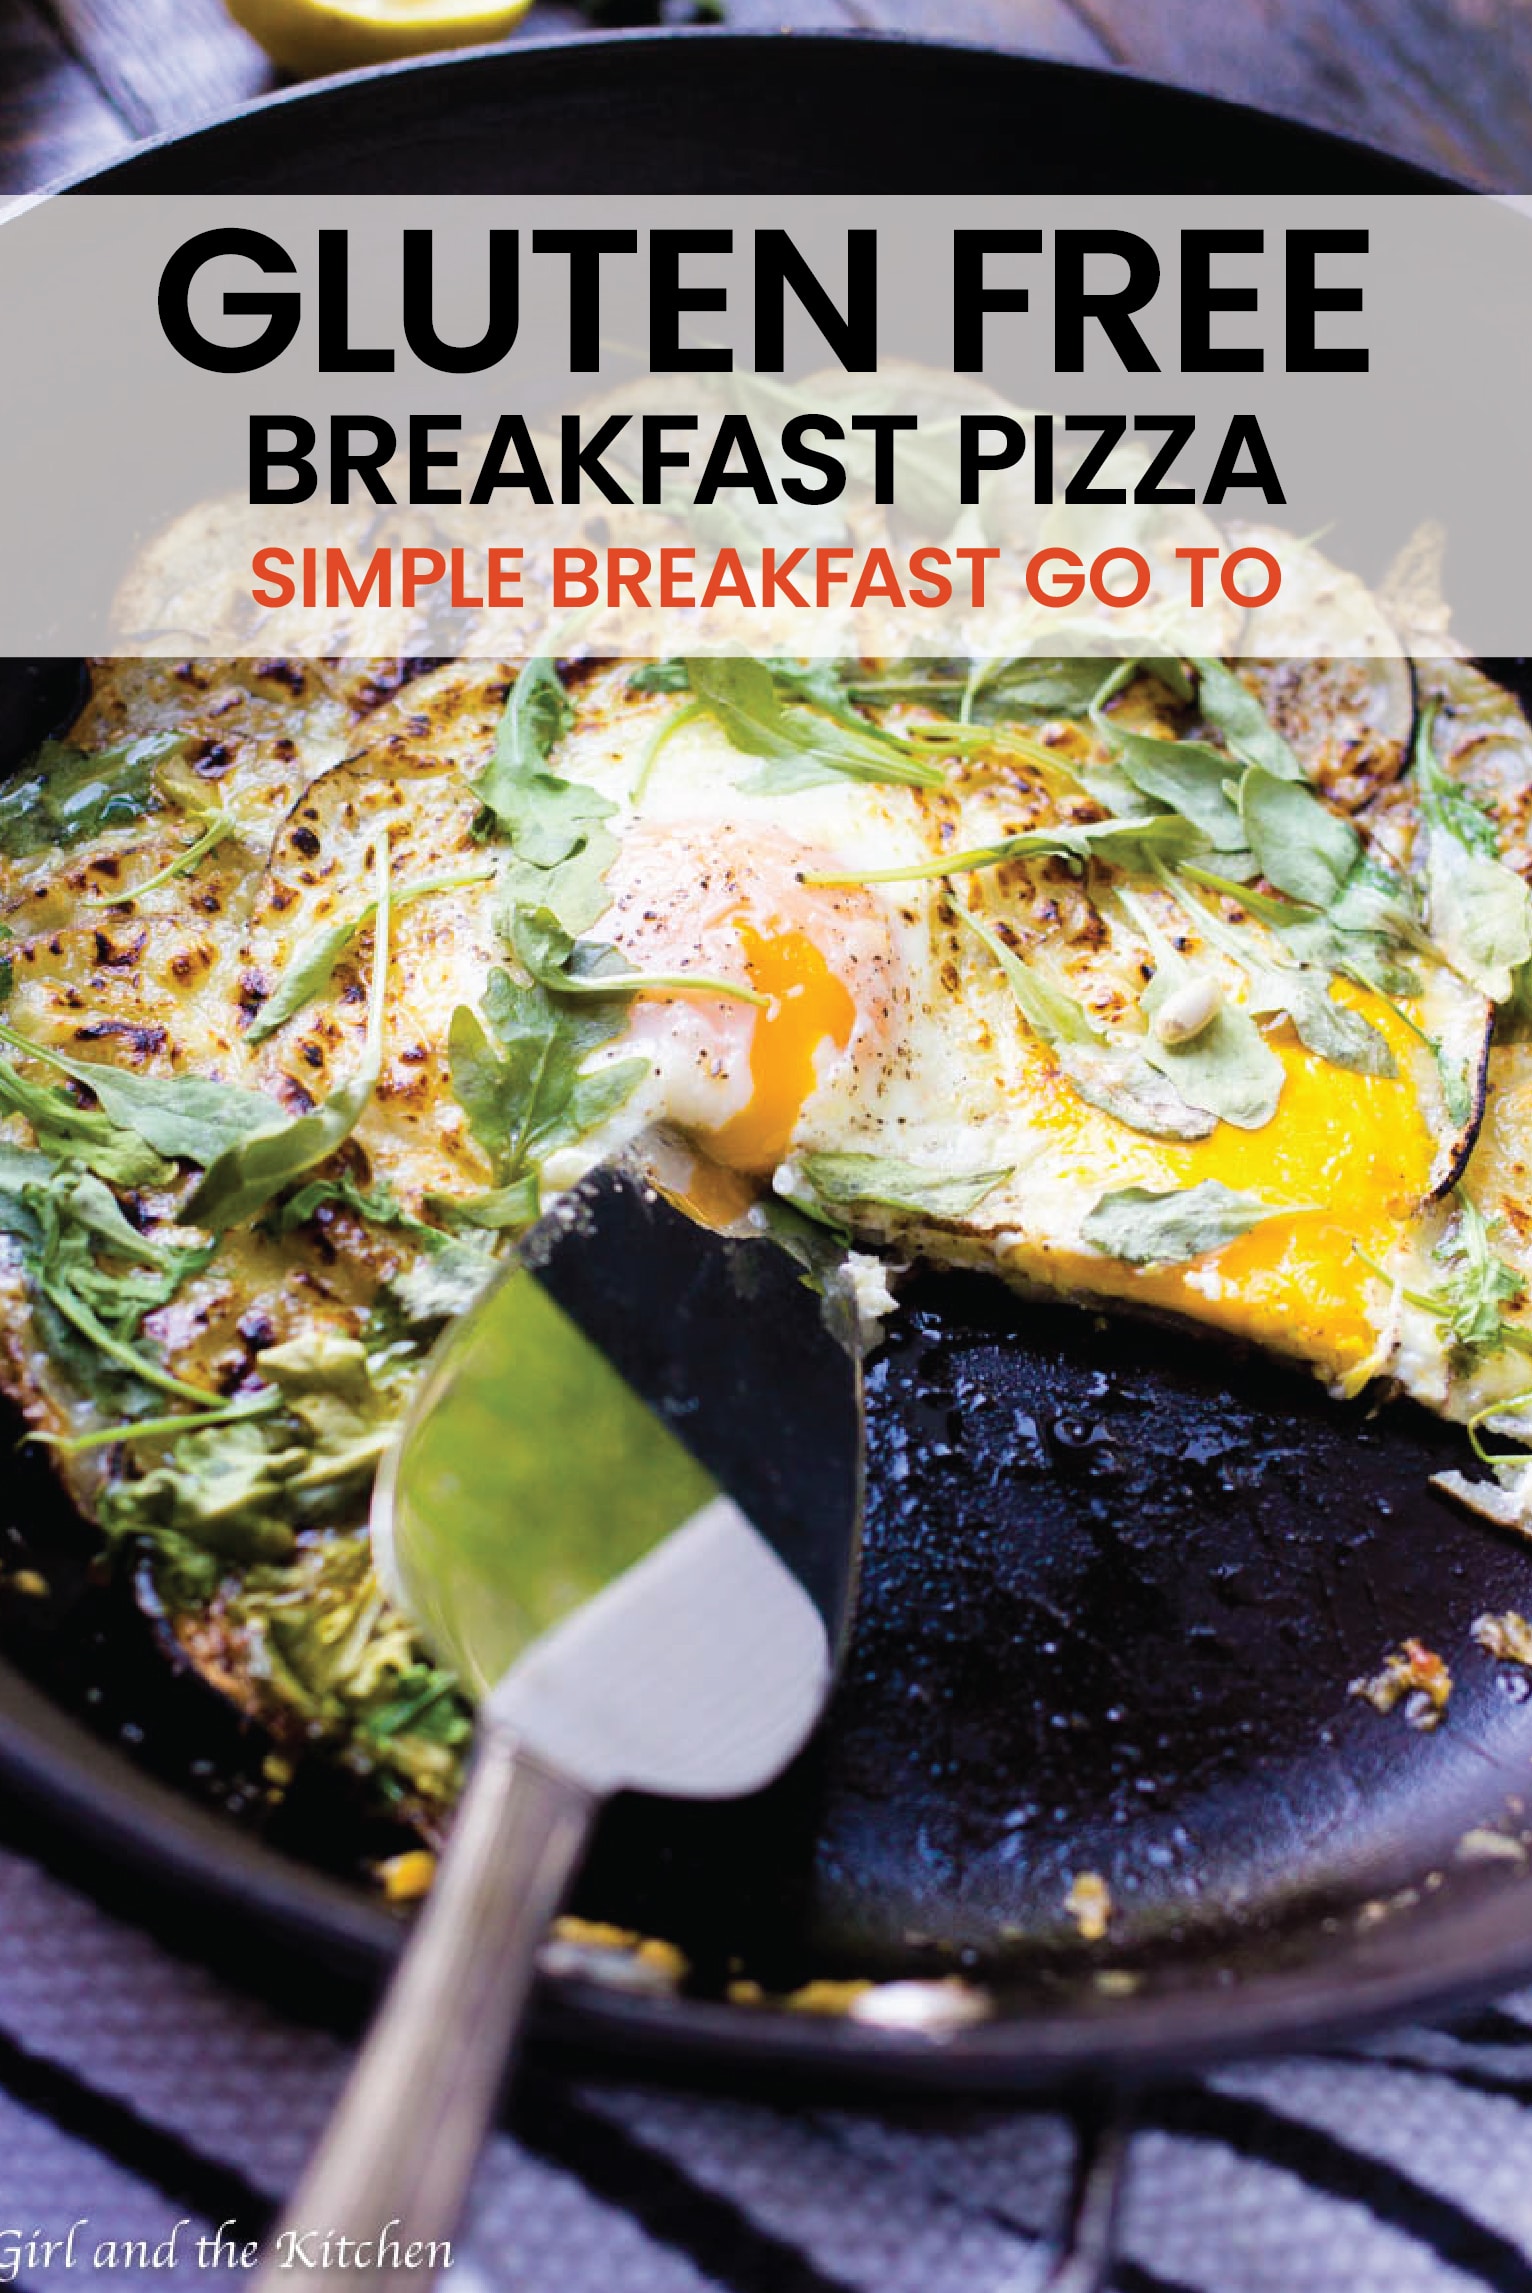 This simple 15 minute gluten free breakfast pizza boasts a super crispy potato crust, salty, melted cheeses and runny eggs.  Breakfast has never been faster or more delicious!  I've got a few simple tips for you that will make this pizza your breakfast go to! #gluten #breakfast #pizza